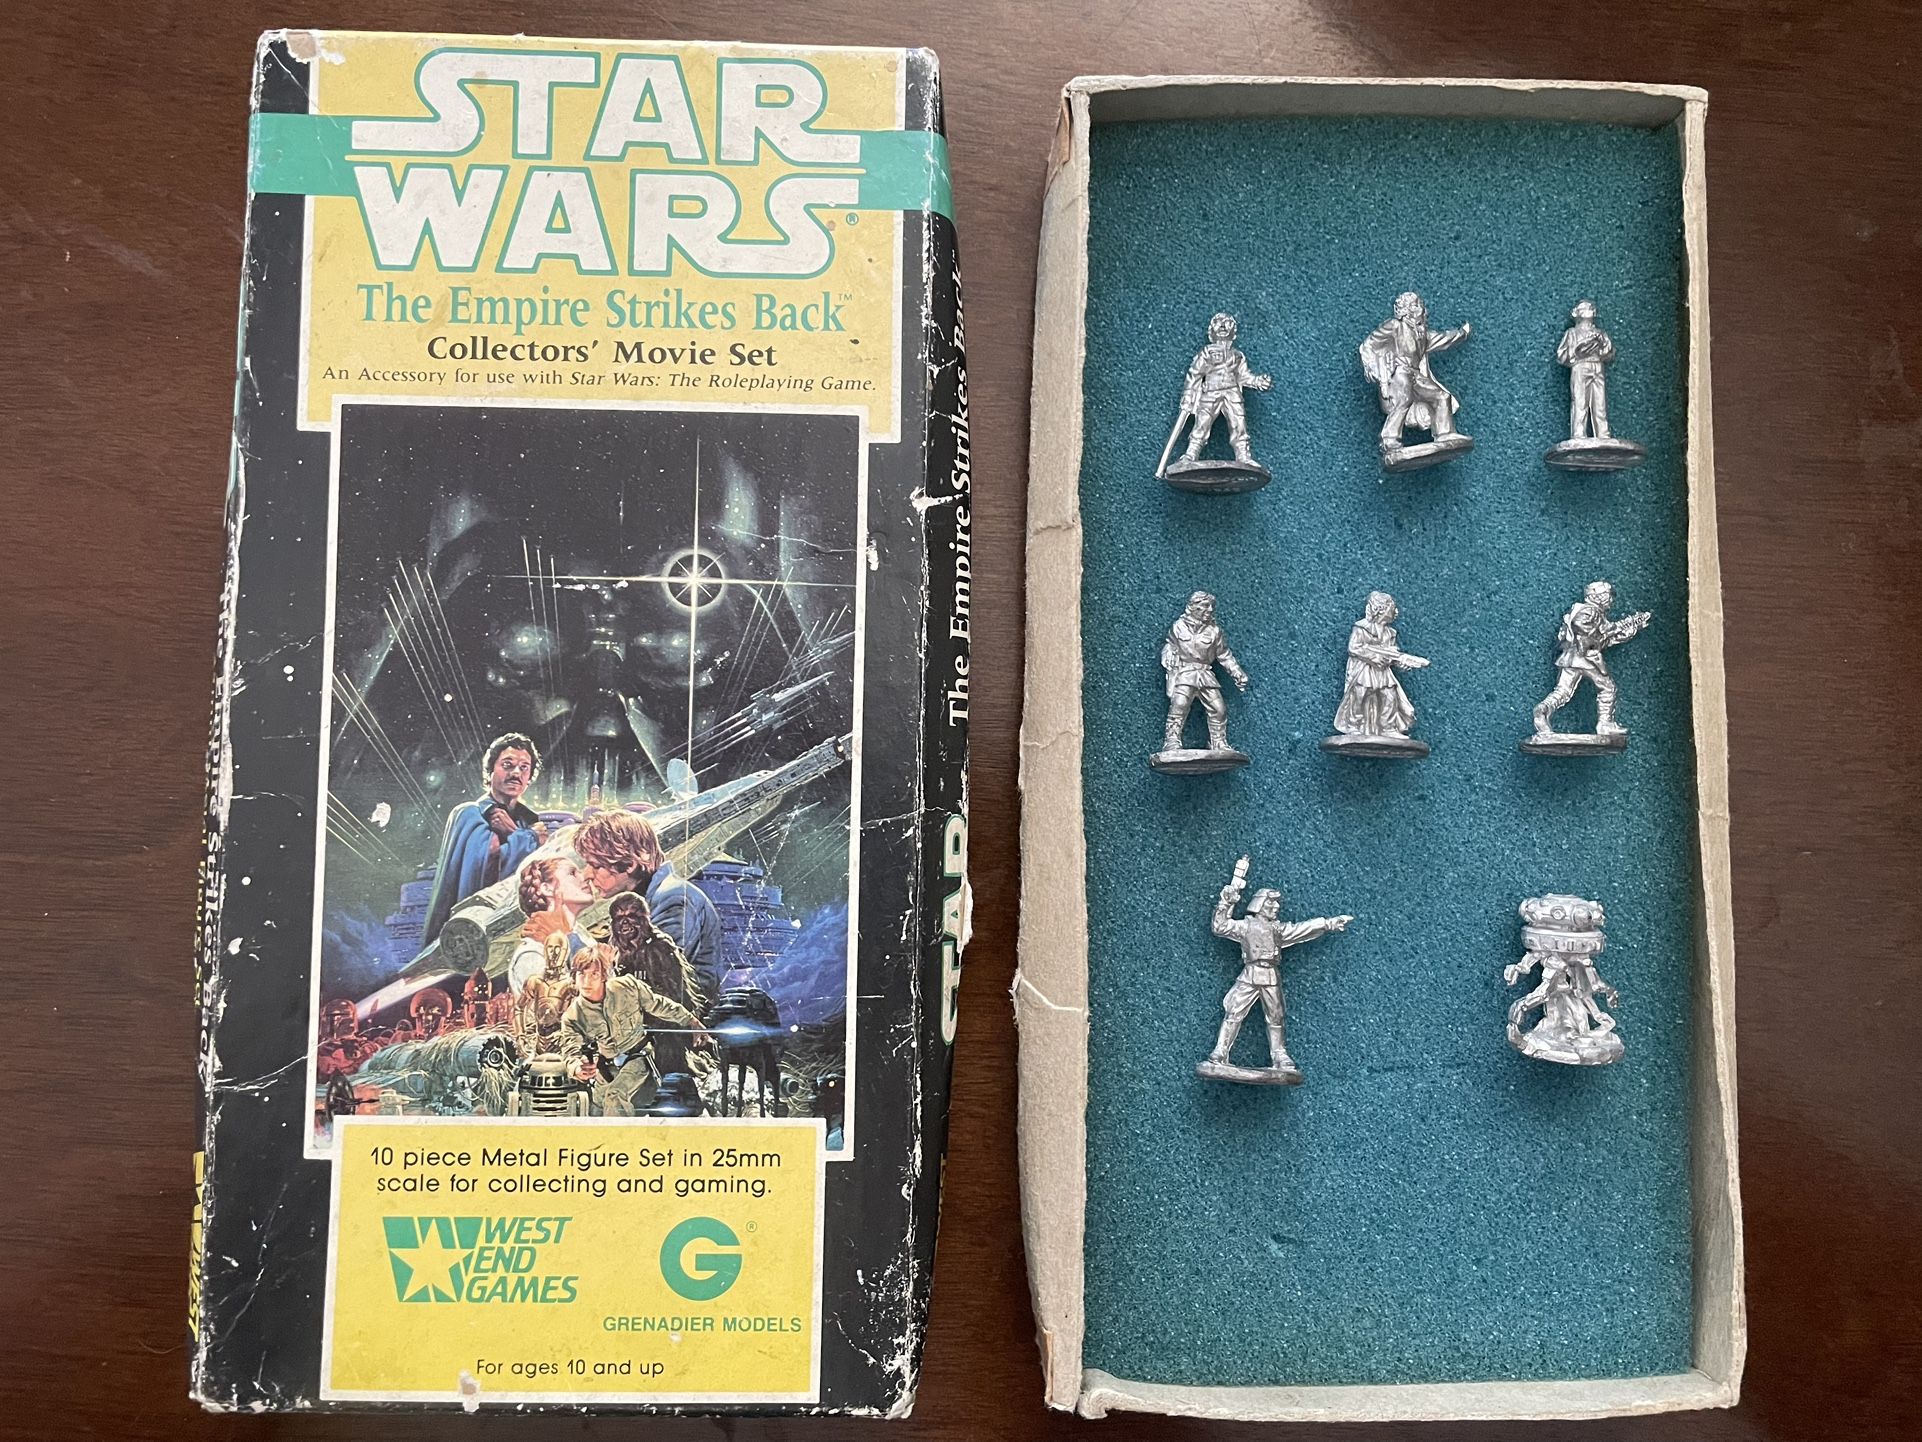 Star Wars The Empire Strikes Back Collectors’ Movie Set Miniatures for Roleplaying Games